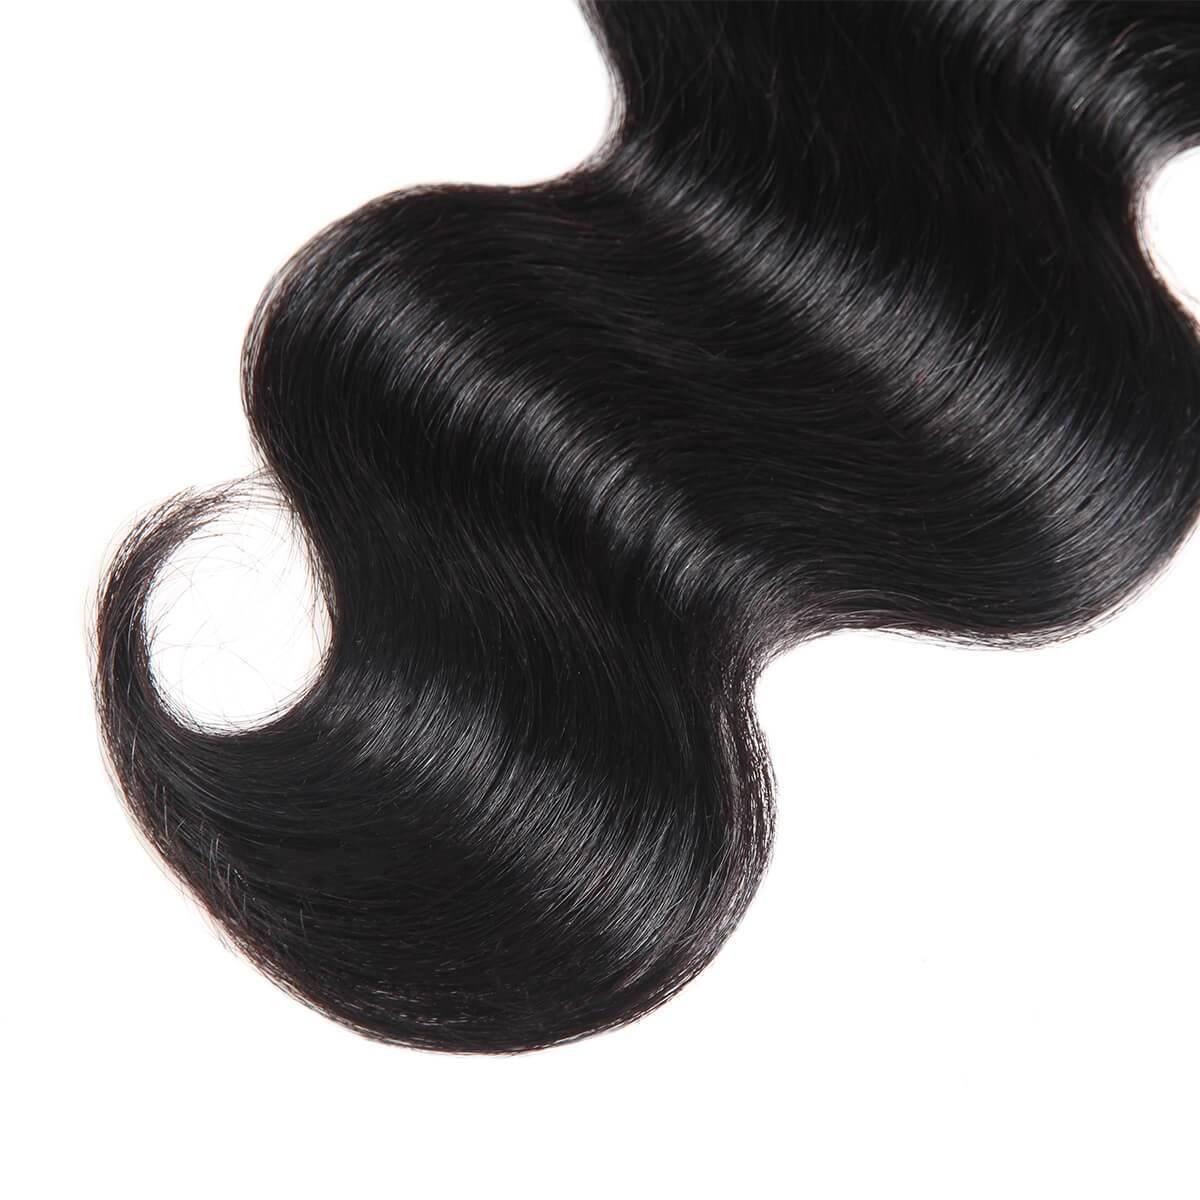 Amoy Virgin Hair Body Wave 8A Remy Hair 4 Bundles with 13*4 Lace Frontal